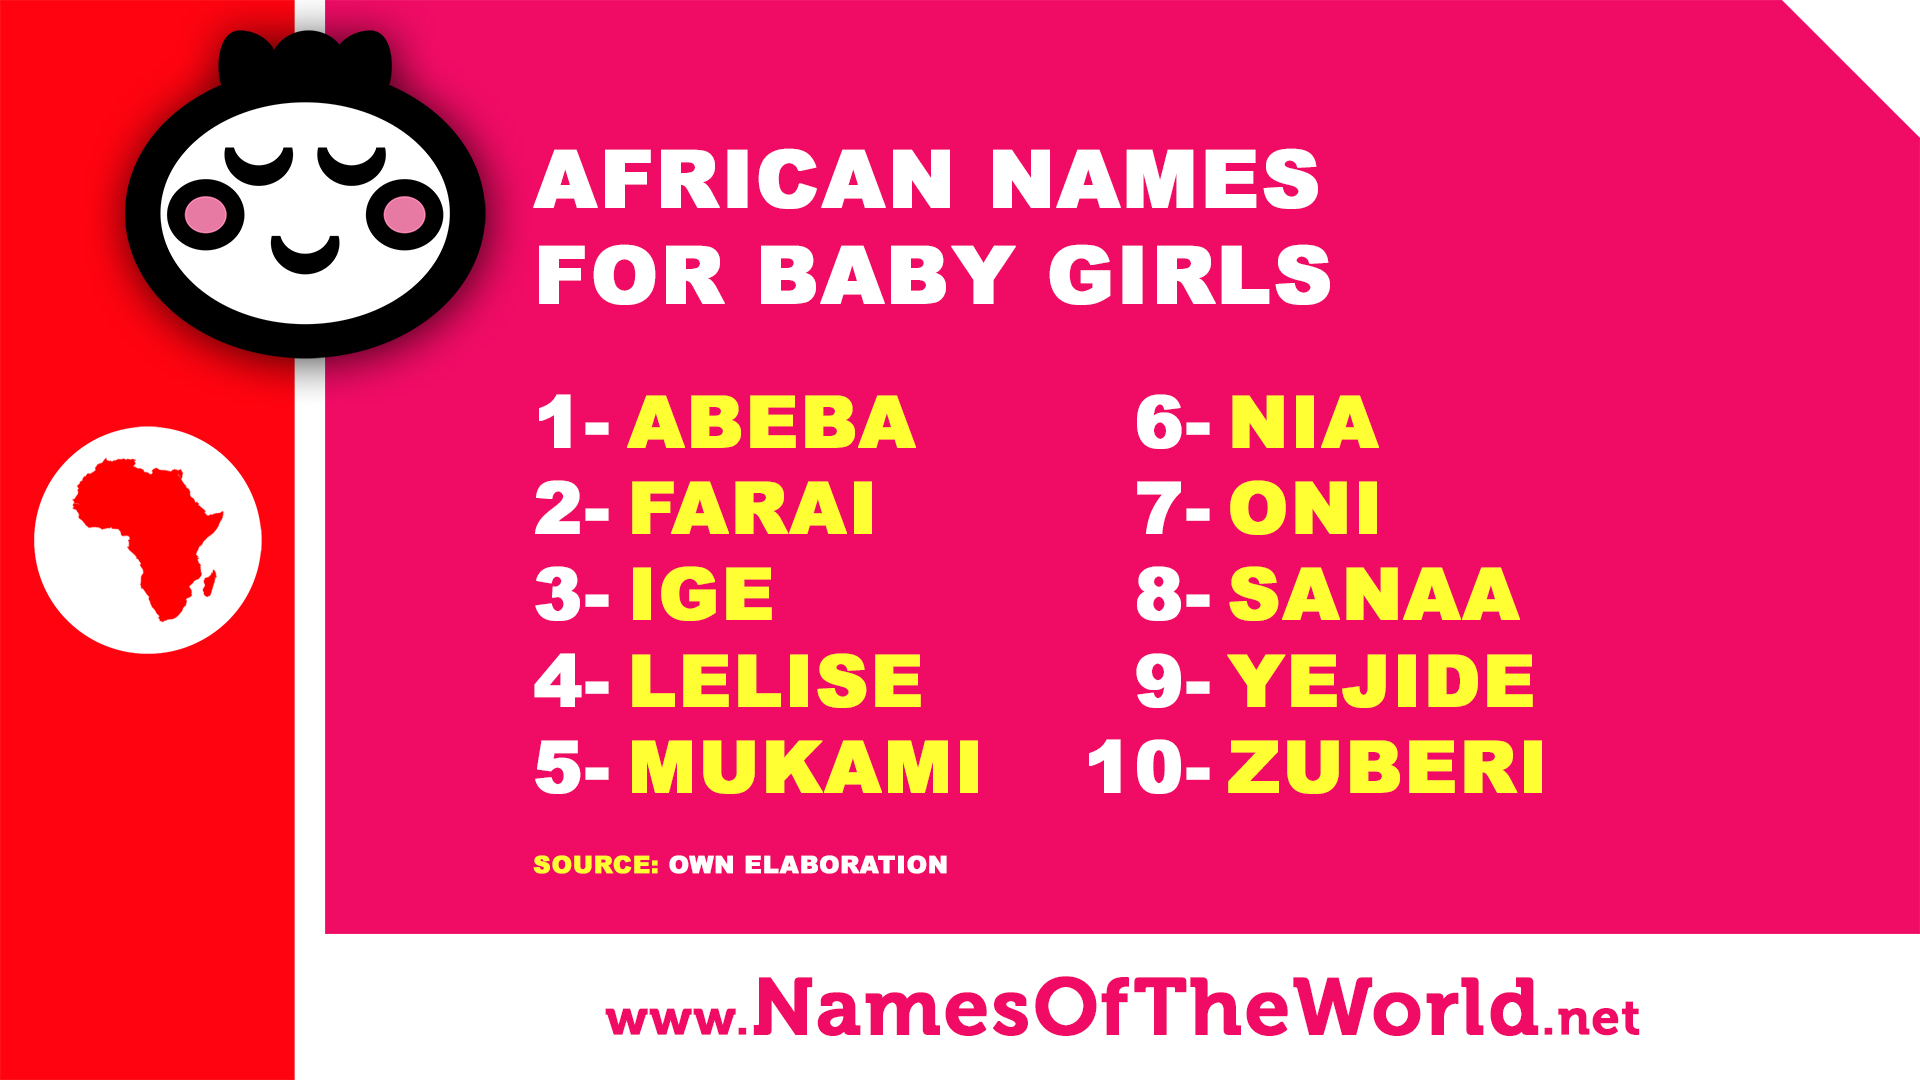 10 African names for baby girls